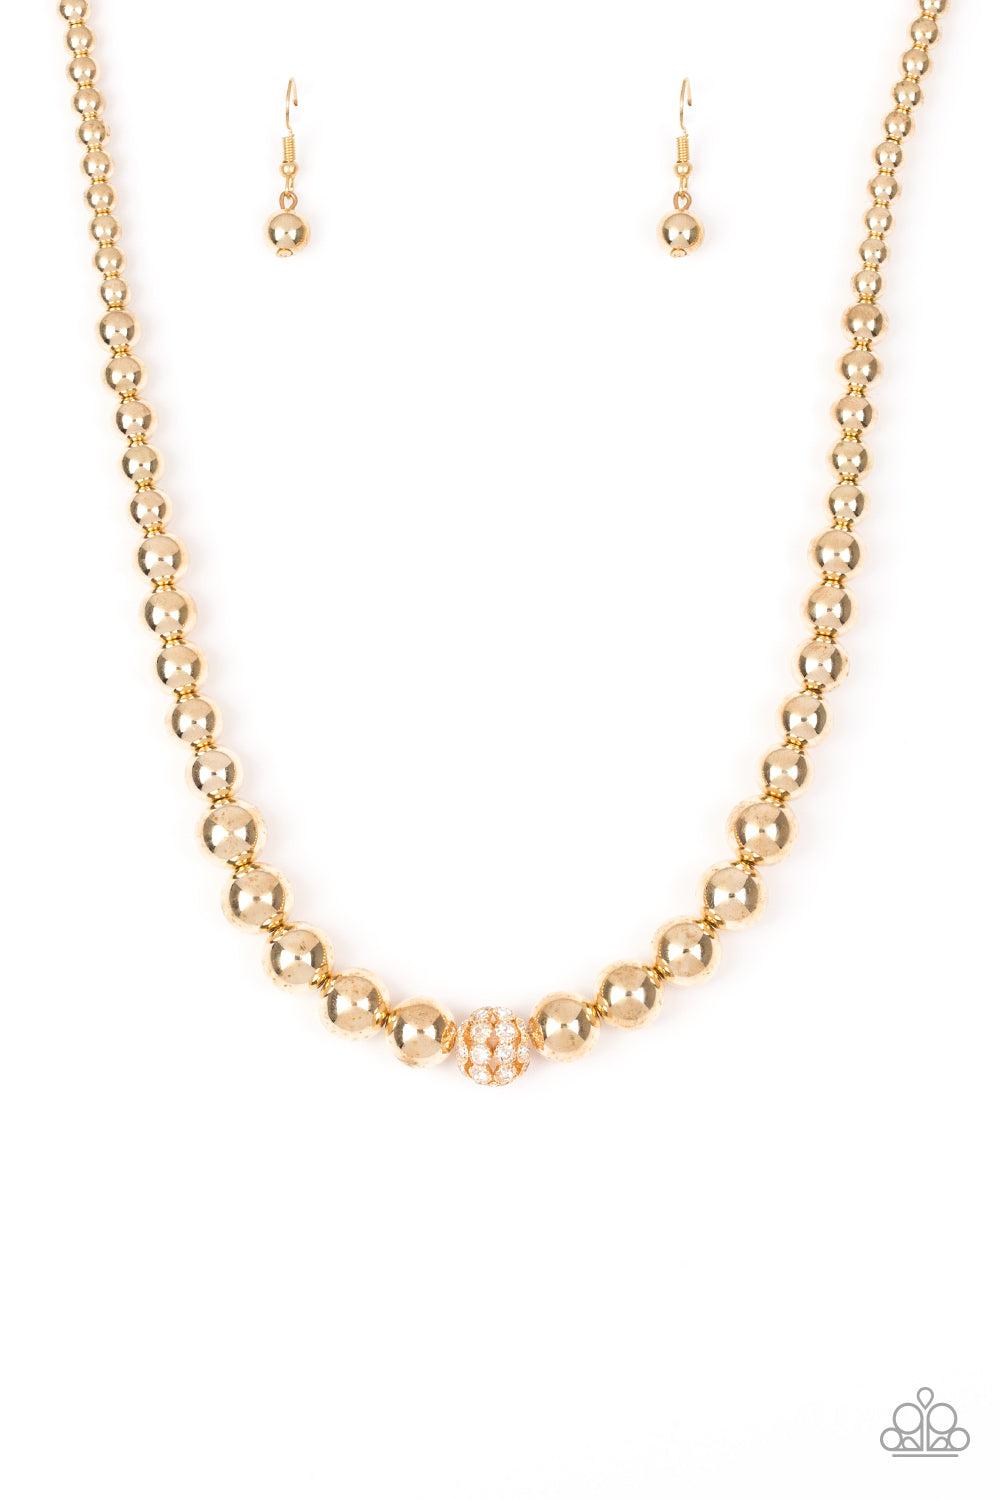 Paparazzi High-Stakes FAME - Gold Necklace - A Finishing Touch 